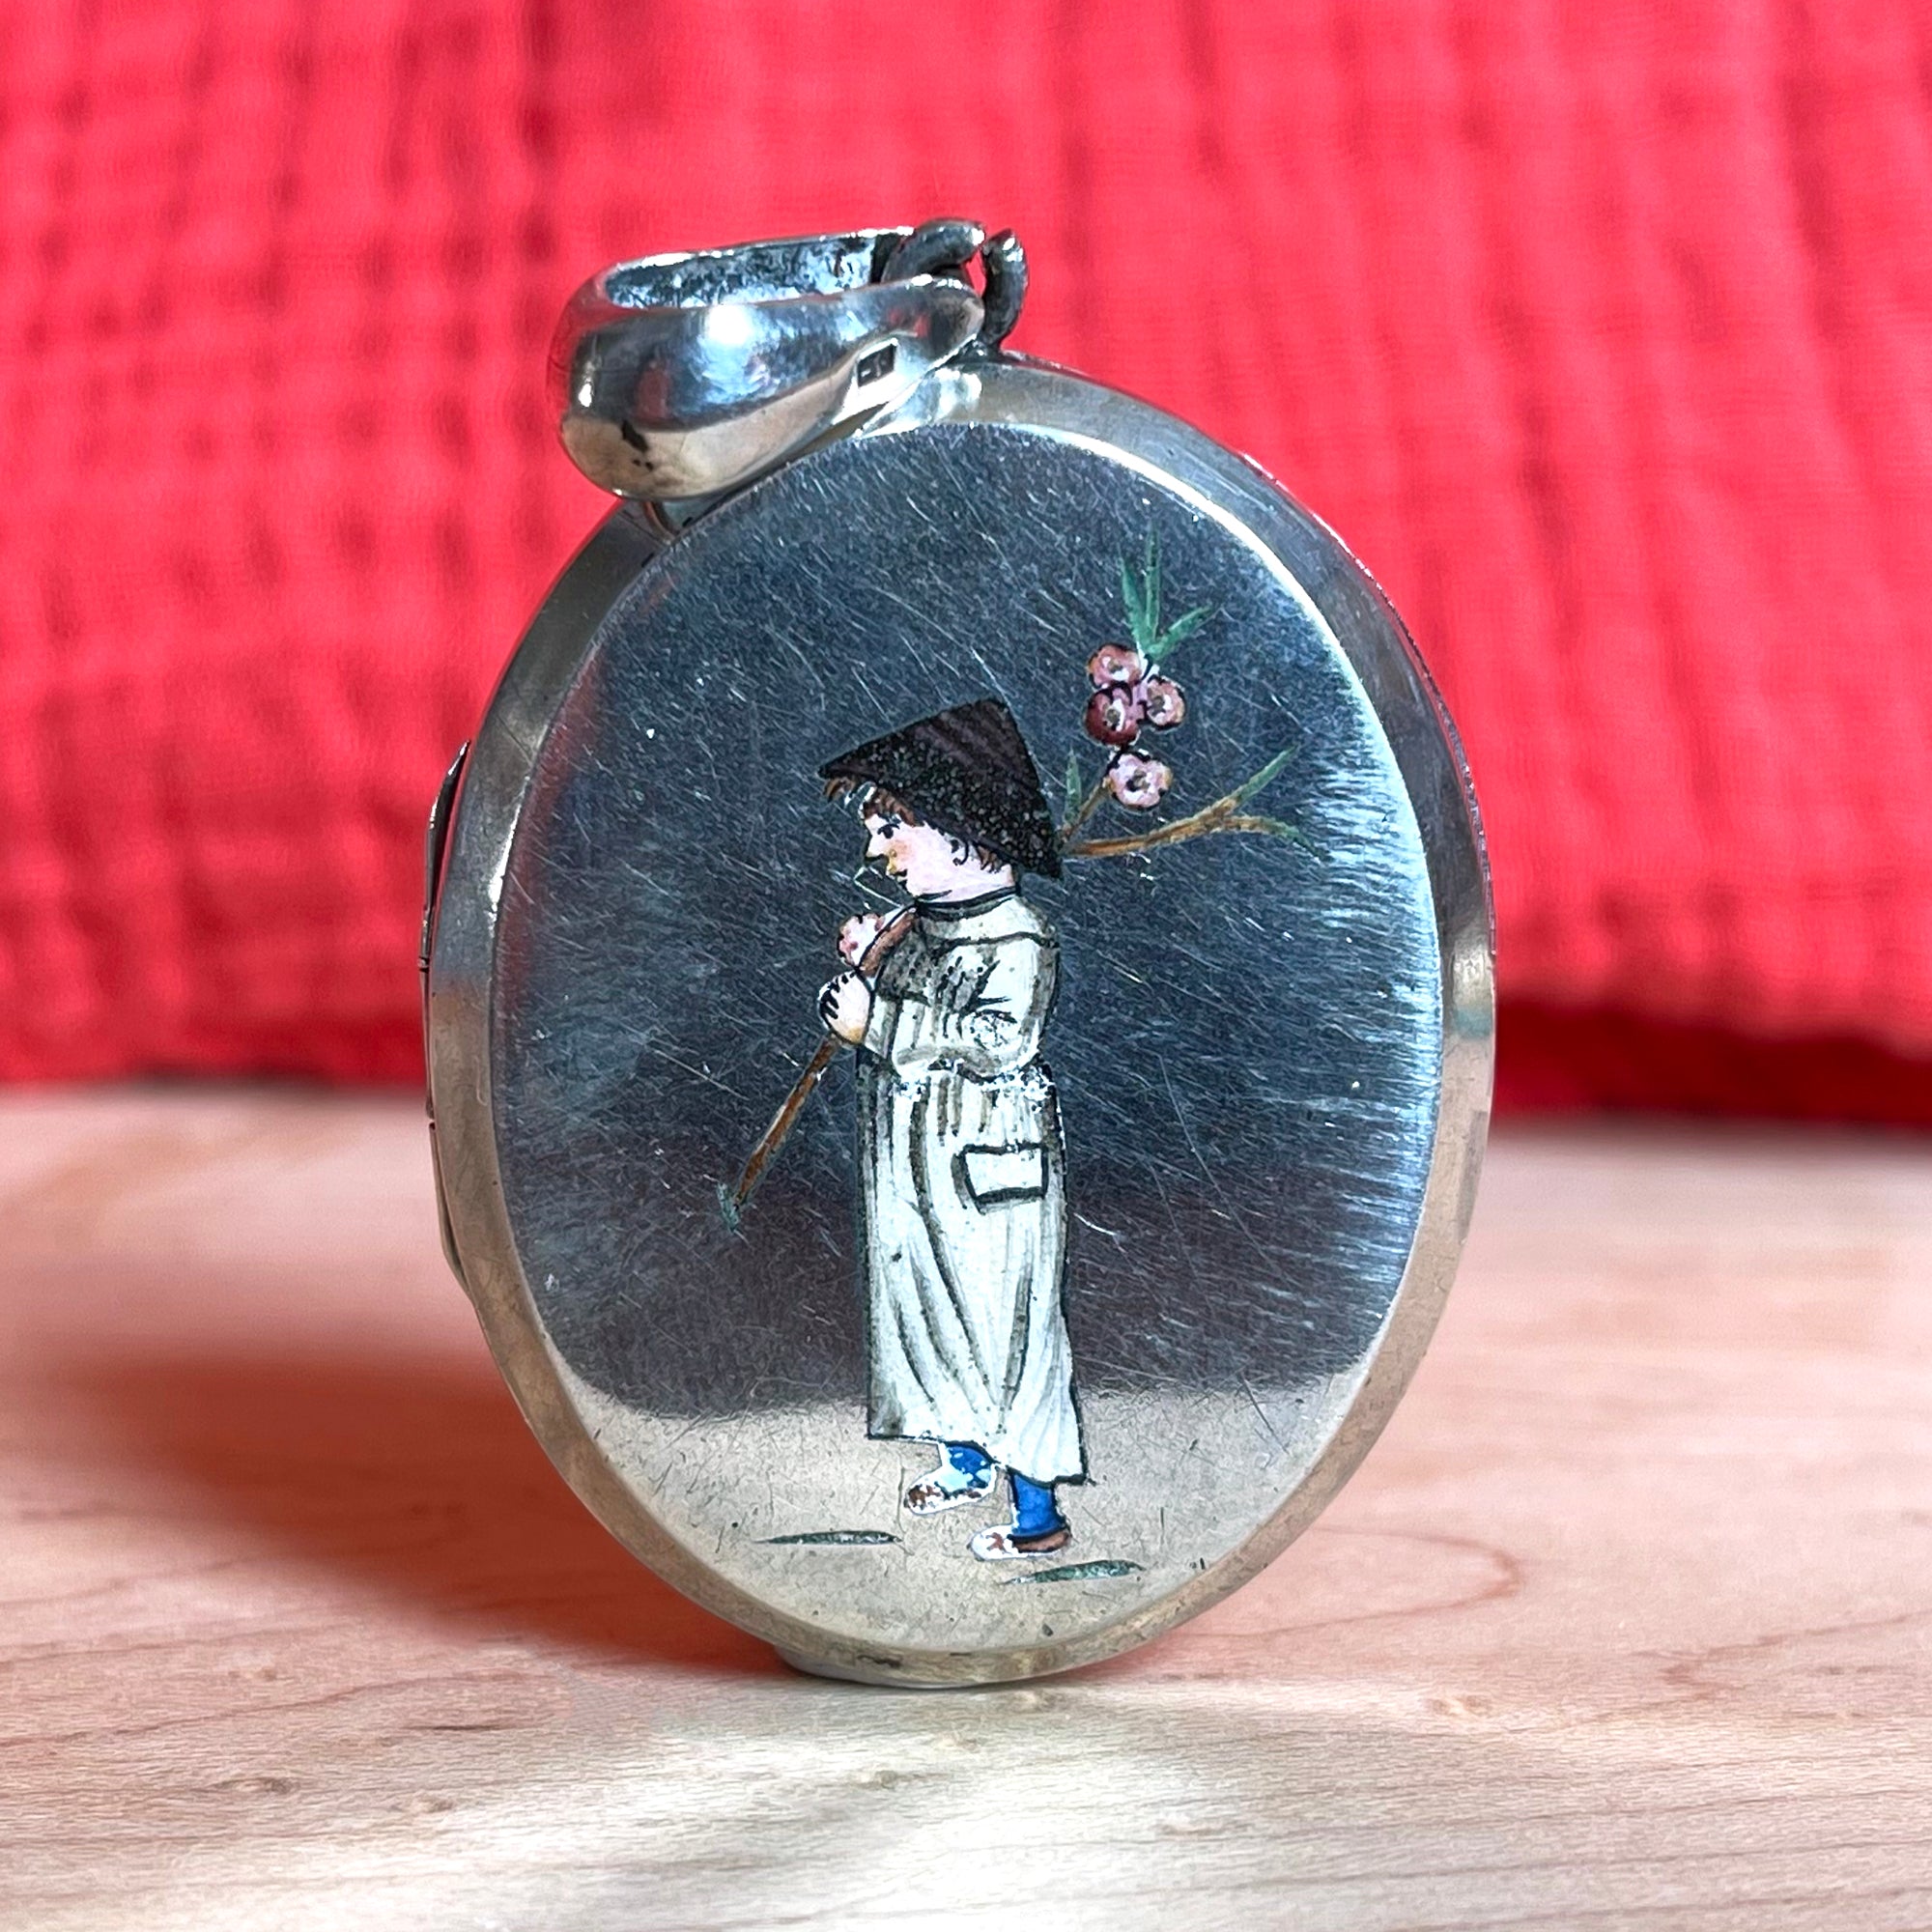 Victorian Silver Enamel Locket Person with Cherry Blossoms